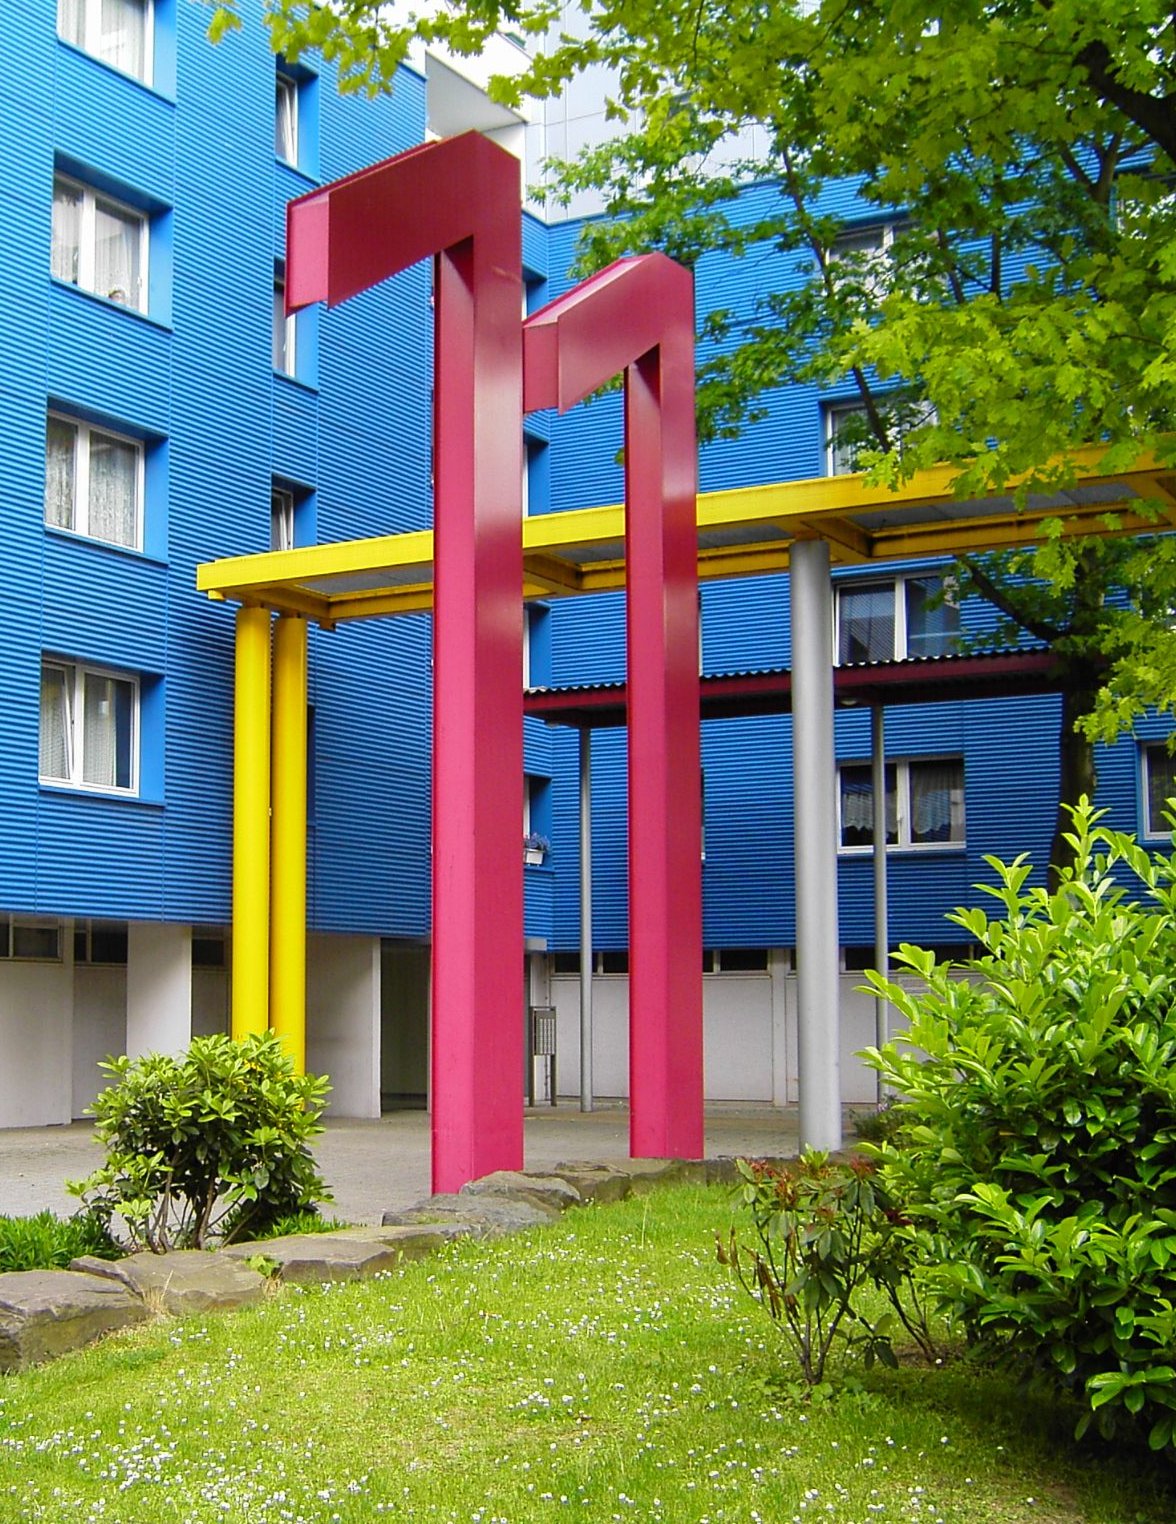 the front entrance to a building with red, yellow, and blue columns